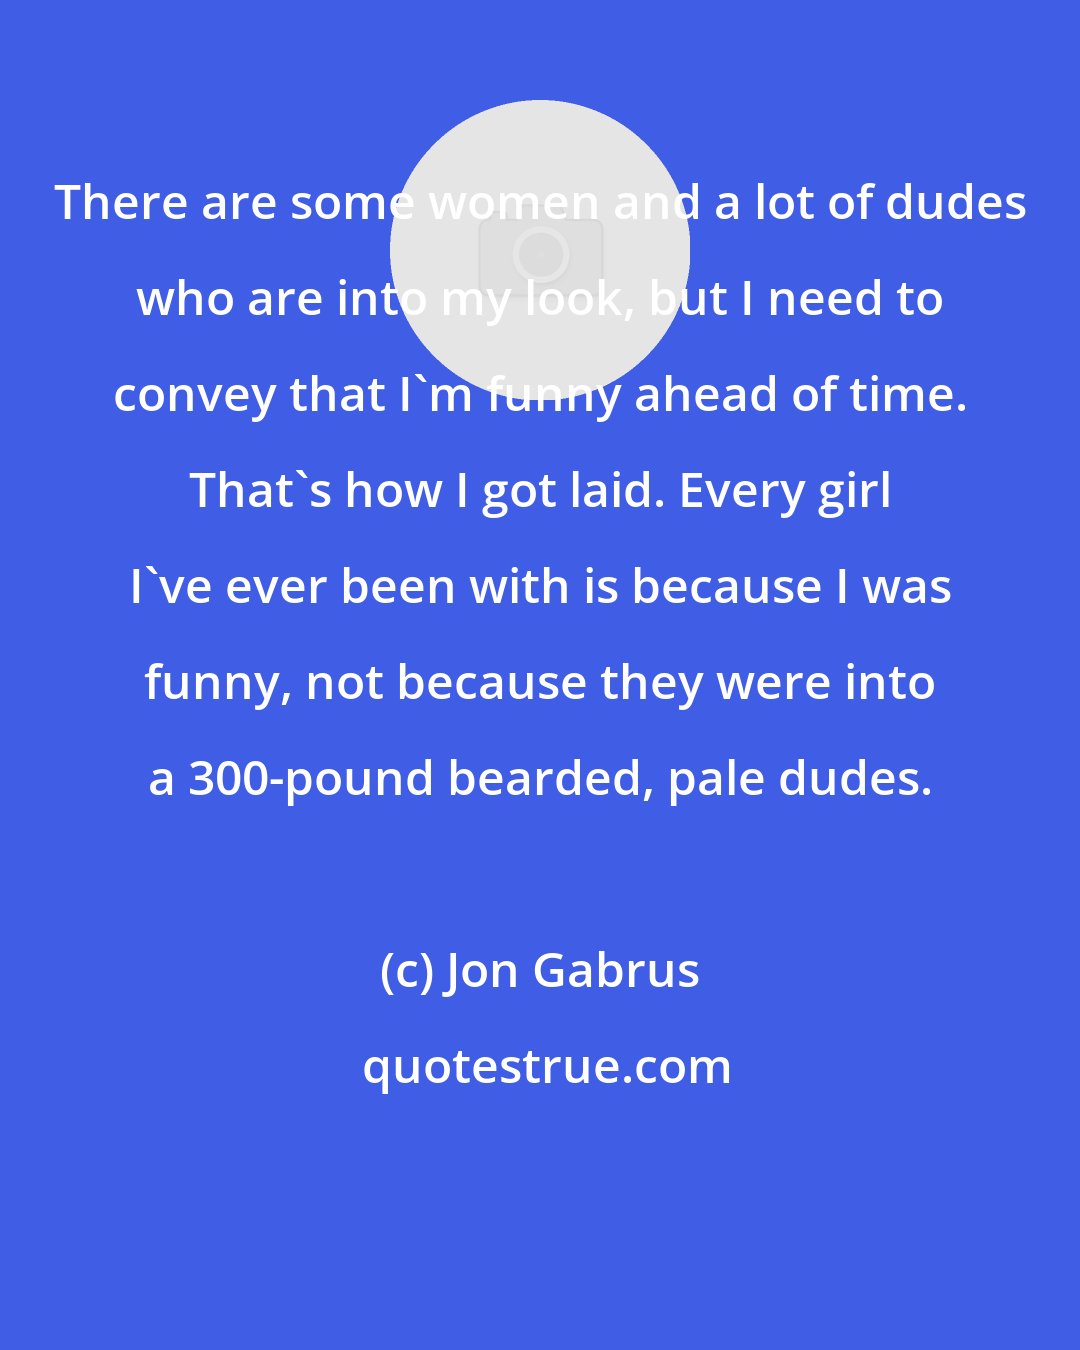 Jon Gabrus: There are some women and a lot of dudes who are into my look, but I need to convey that I'm funny ahead of time. That's how I got laid. Every girl I've ever been with is because I was funny, not because they were into a 300-pound bearded, pale dudes.